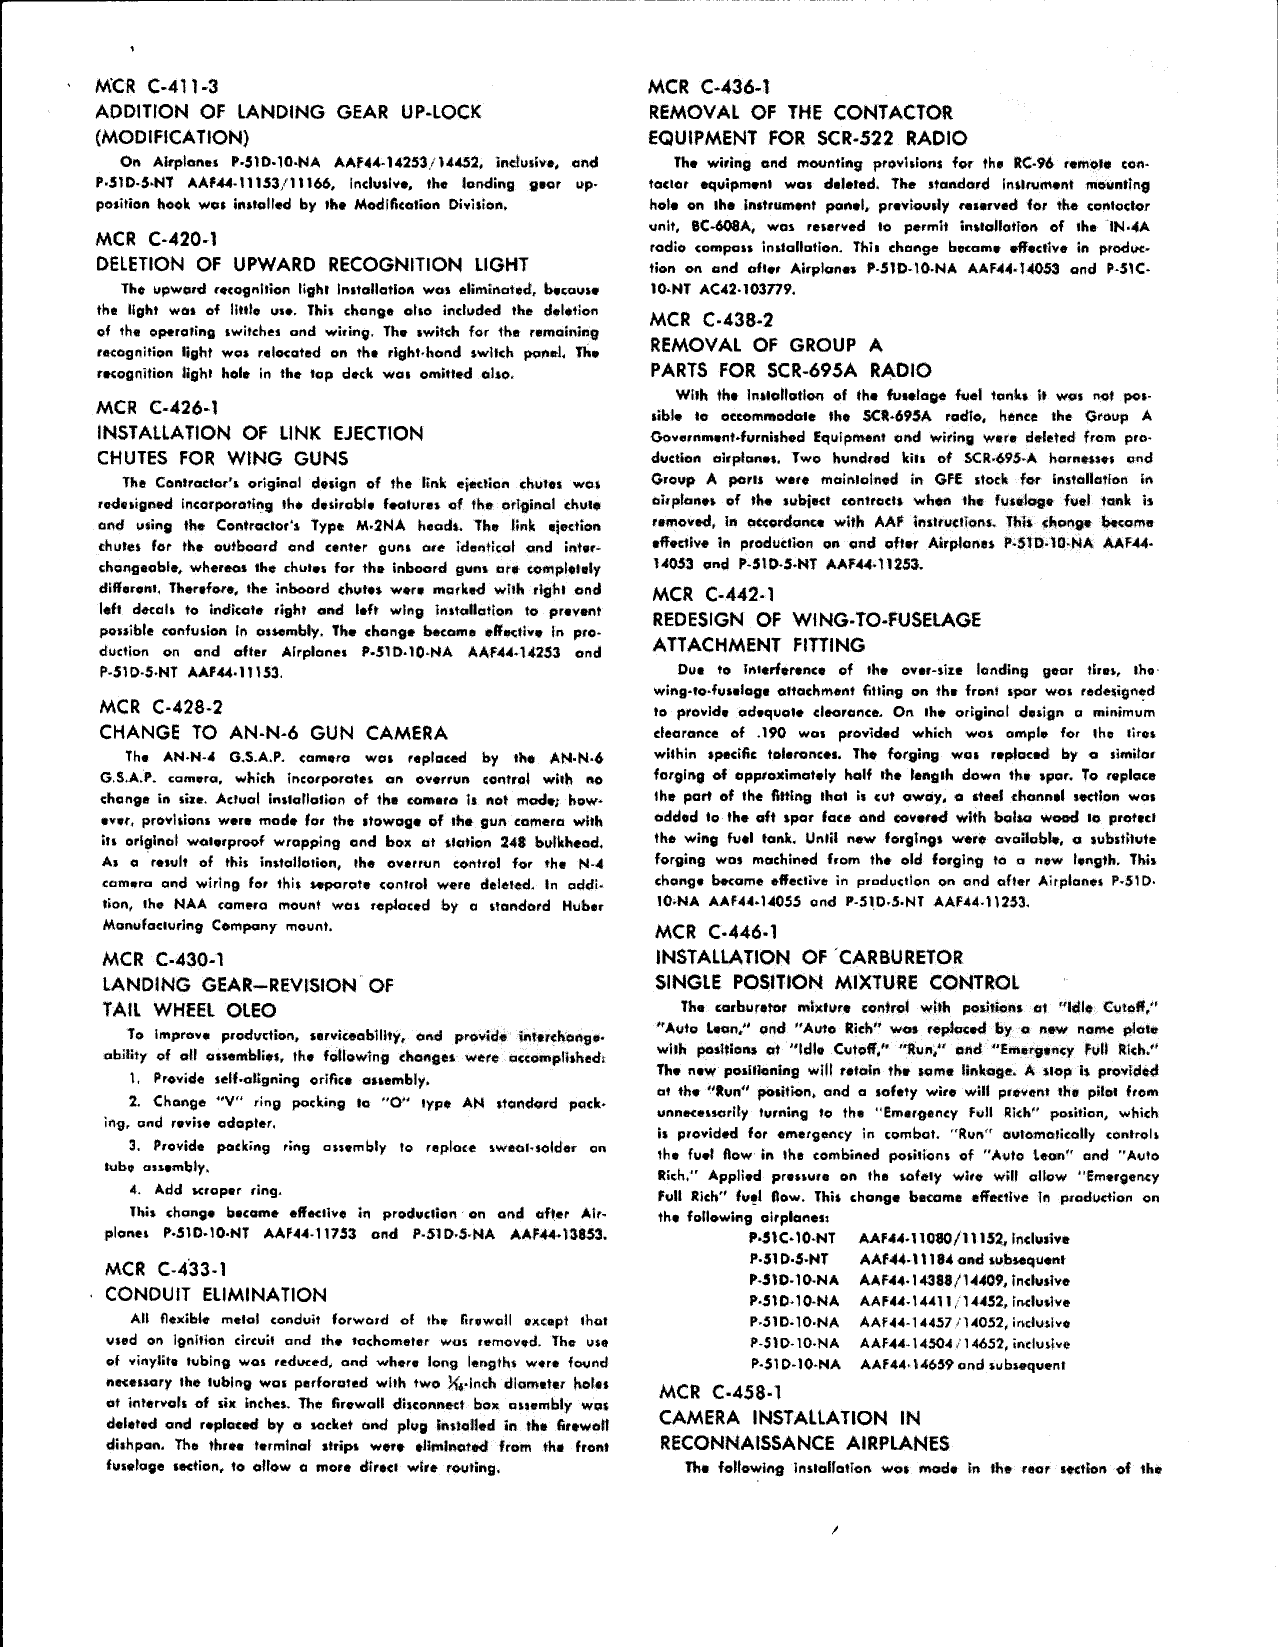 Sample page 3 from AirCorps Library document: Summary of Changes - Block Description for P-51D-10 Airplanes